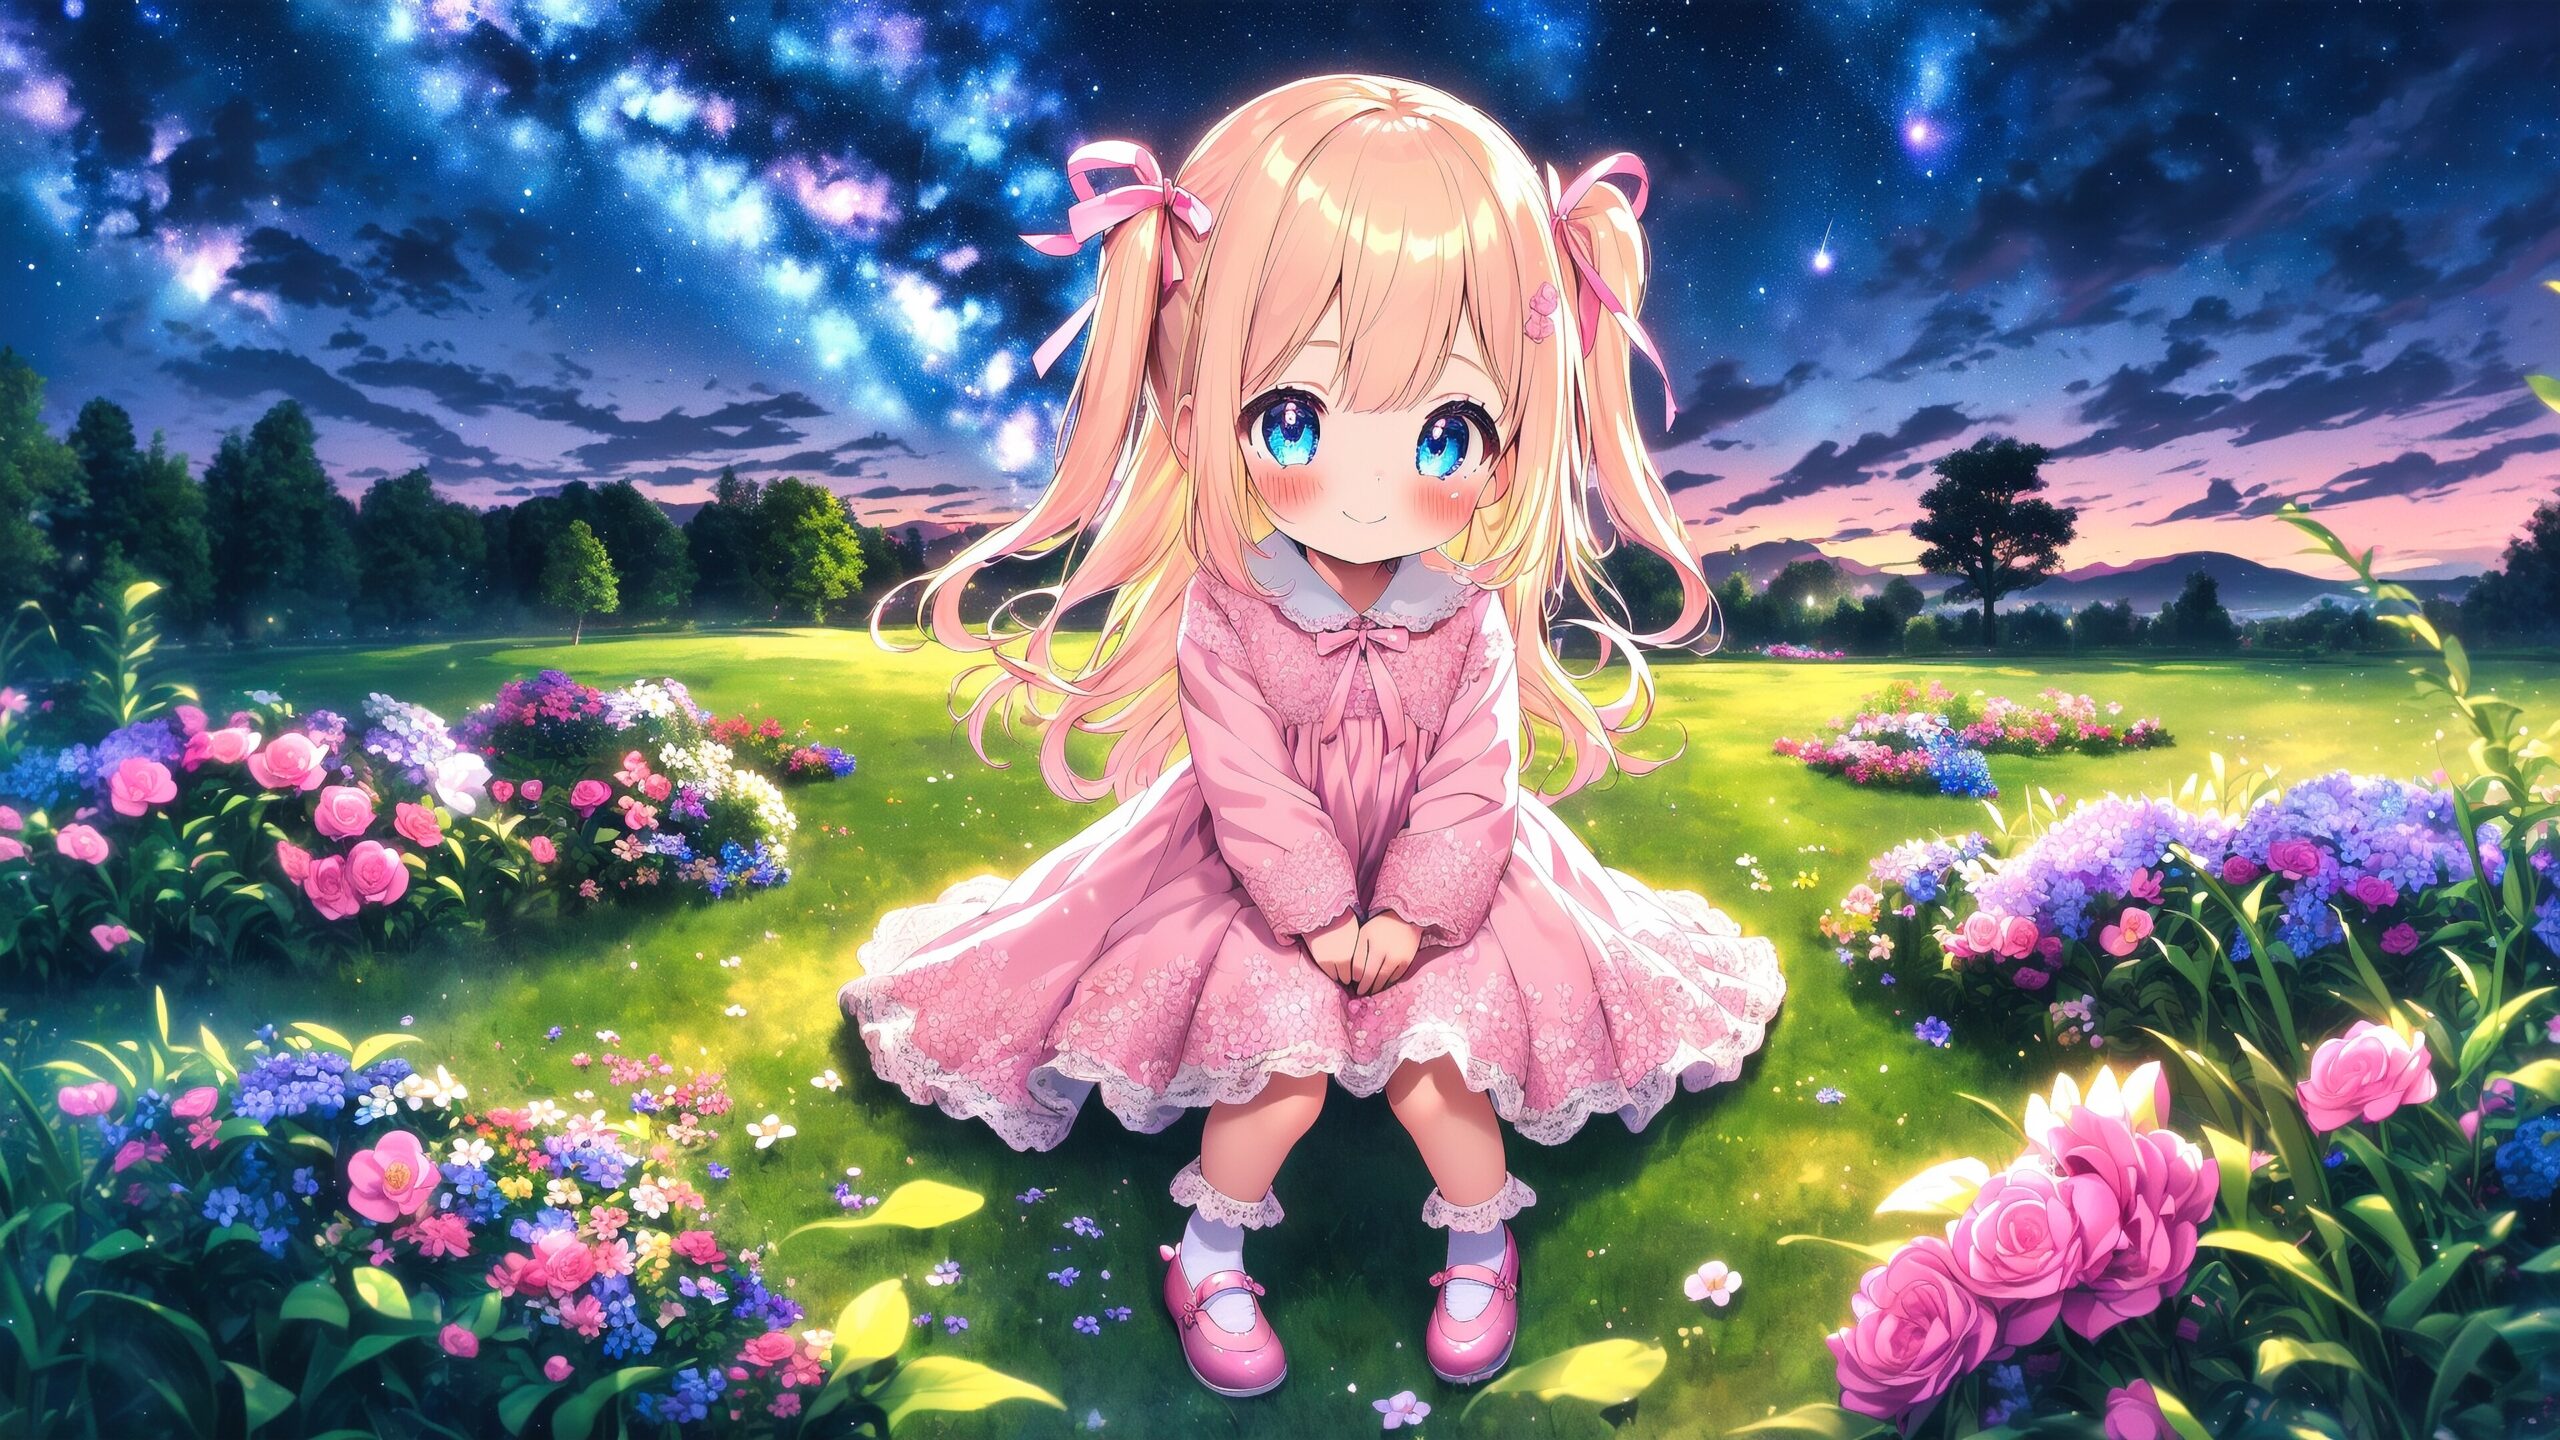 4K Wallpapers) Blonde girl in a dress, under the night sky - zzz's